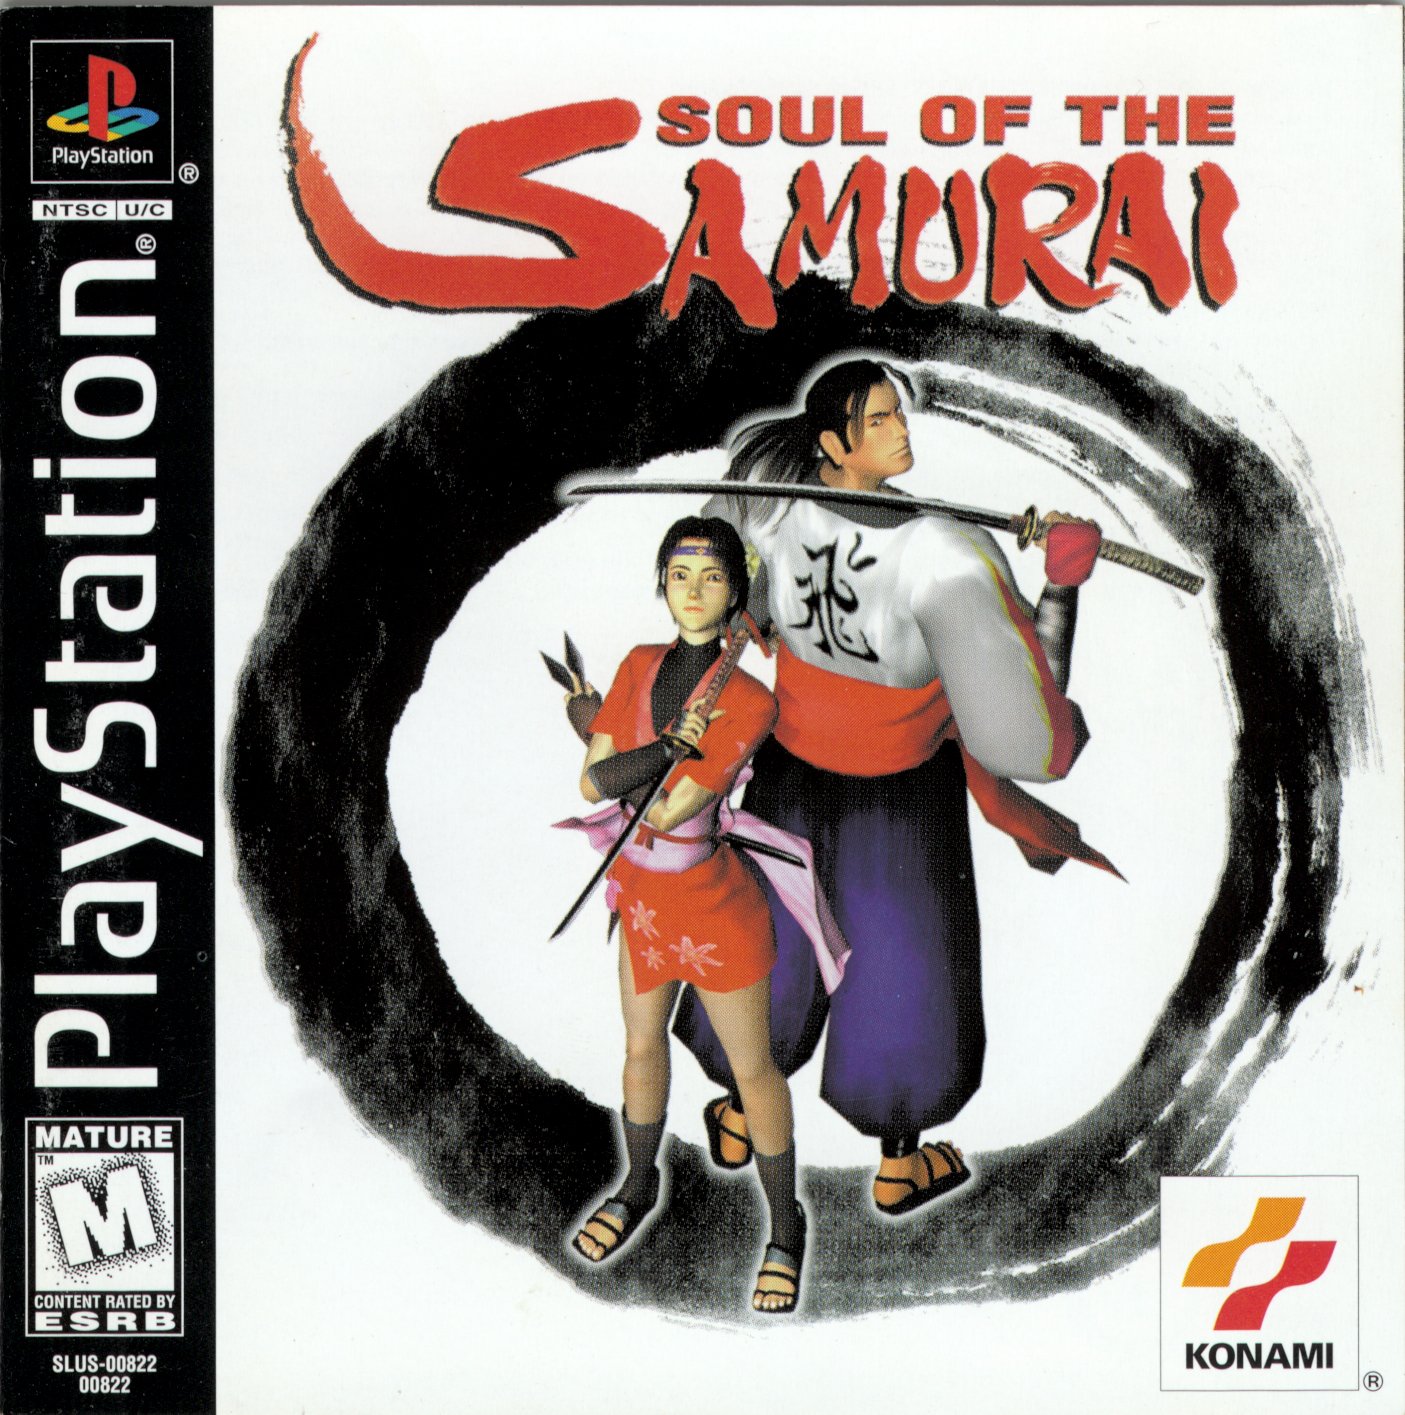 Soul ps1. Ronin Blade ps1. Soul of the Samurai ps1. Soul of the Samurai обложка. Soul of the Samurai ps1 Cover.